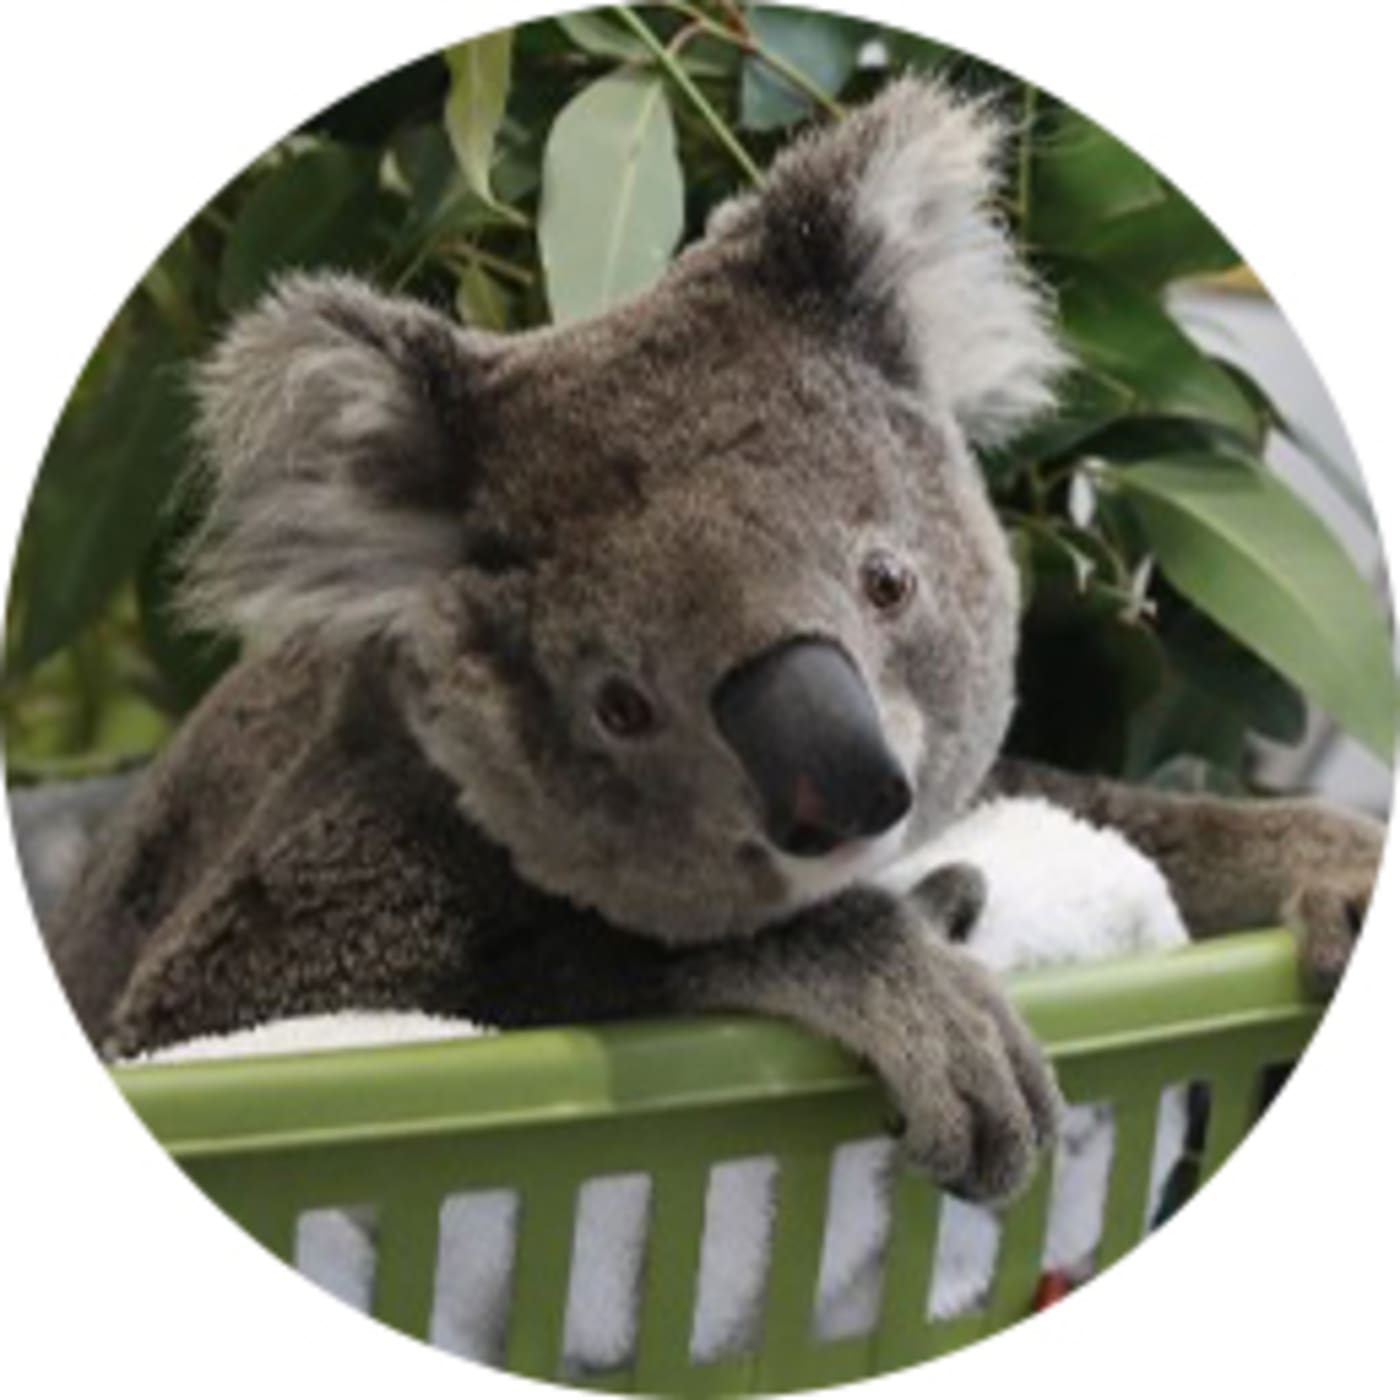 Tile image of a koala in care sitting in a basket